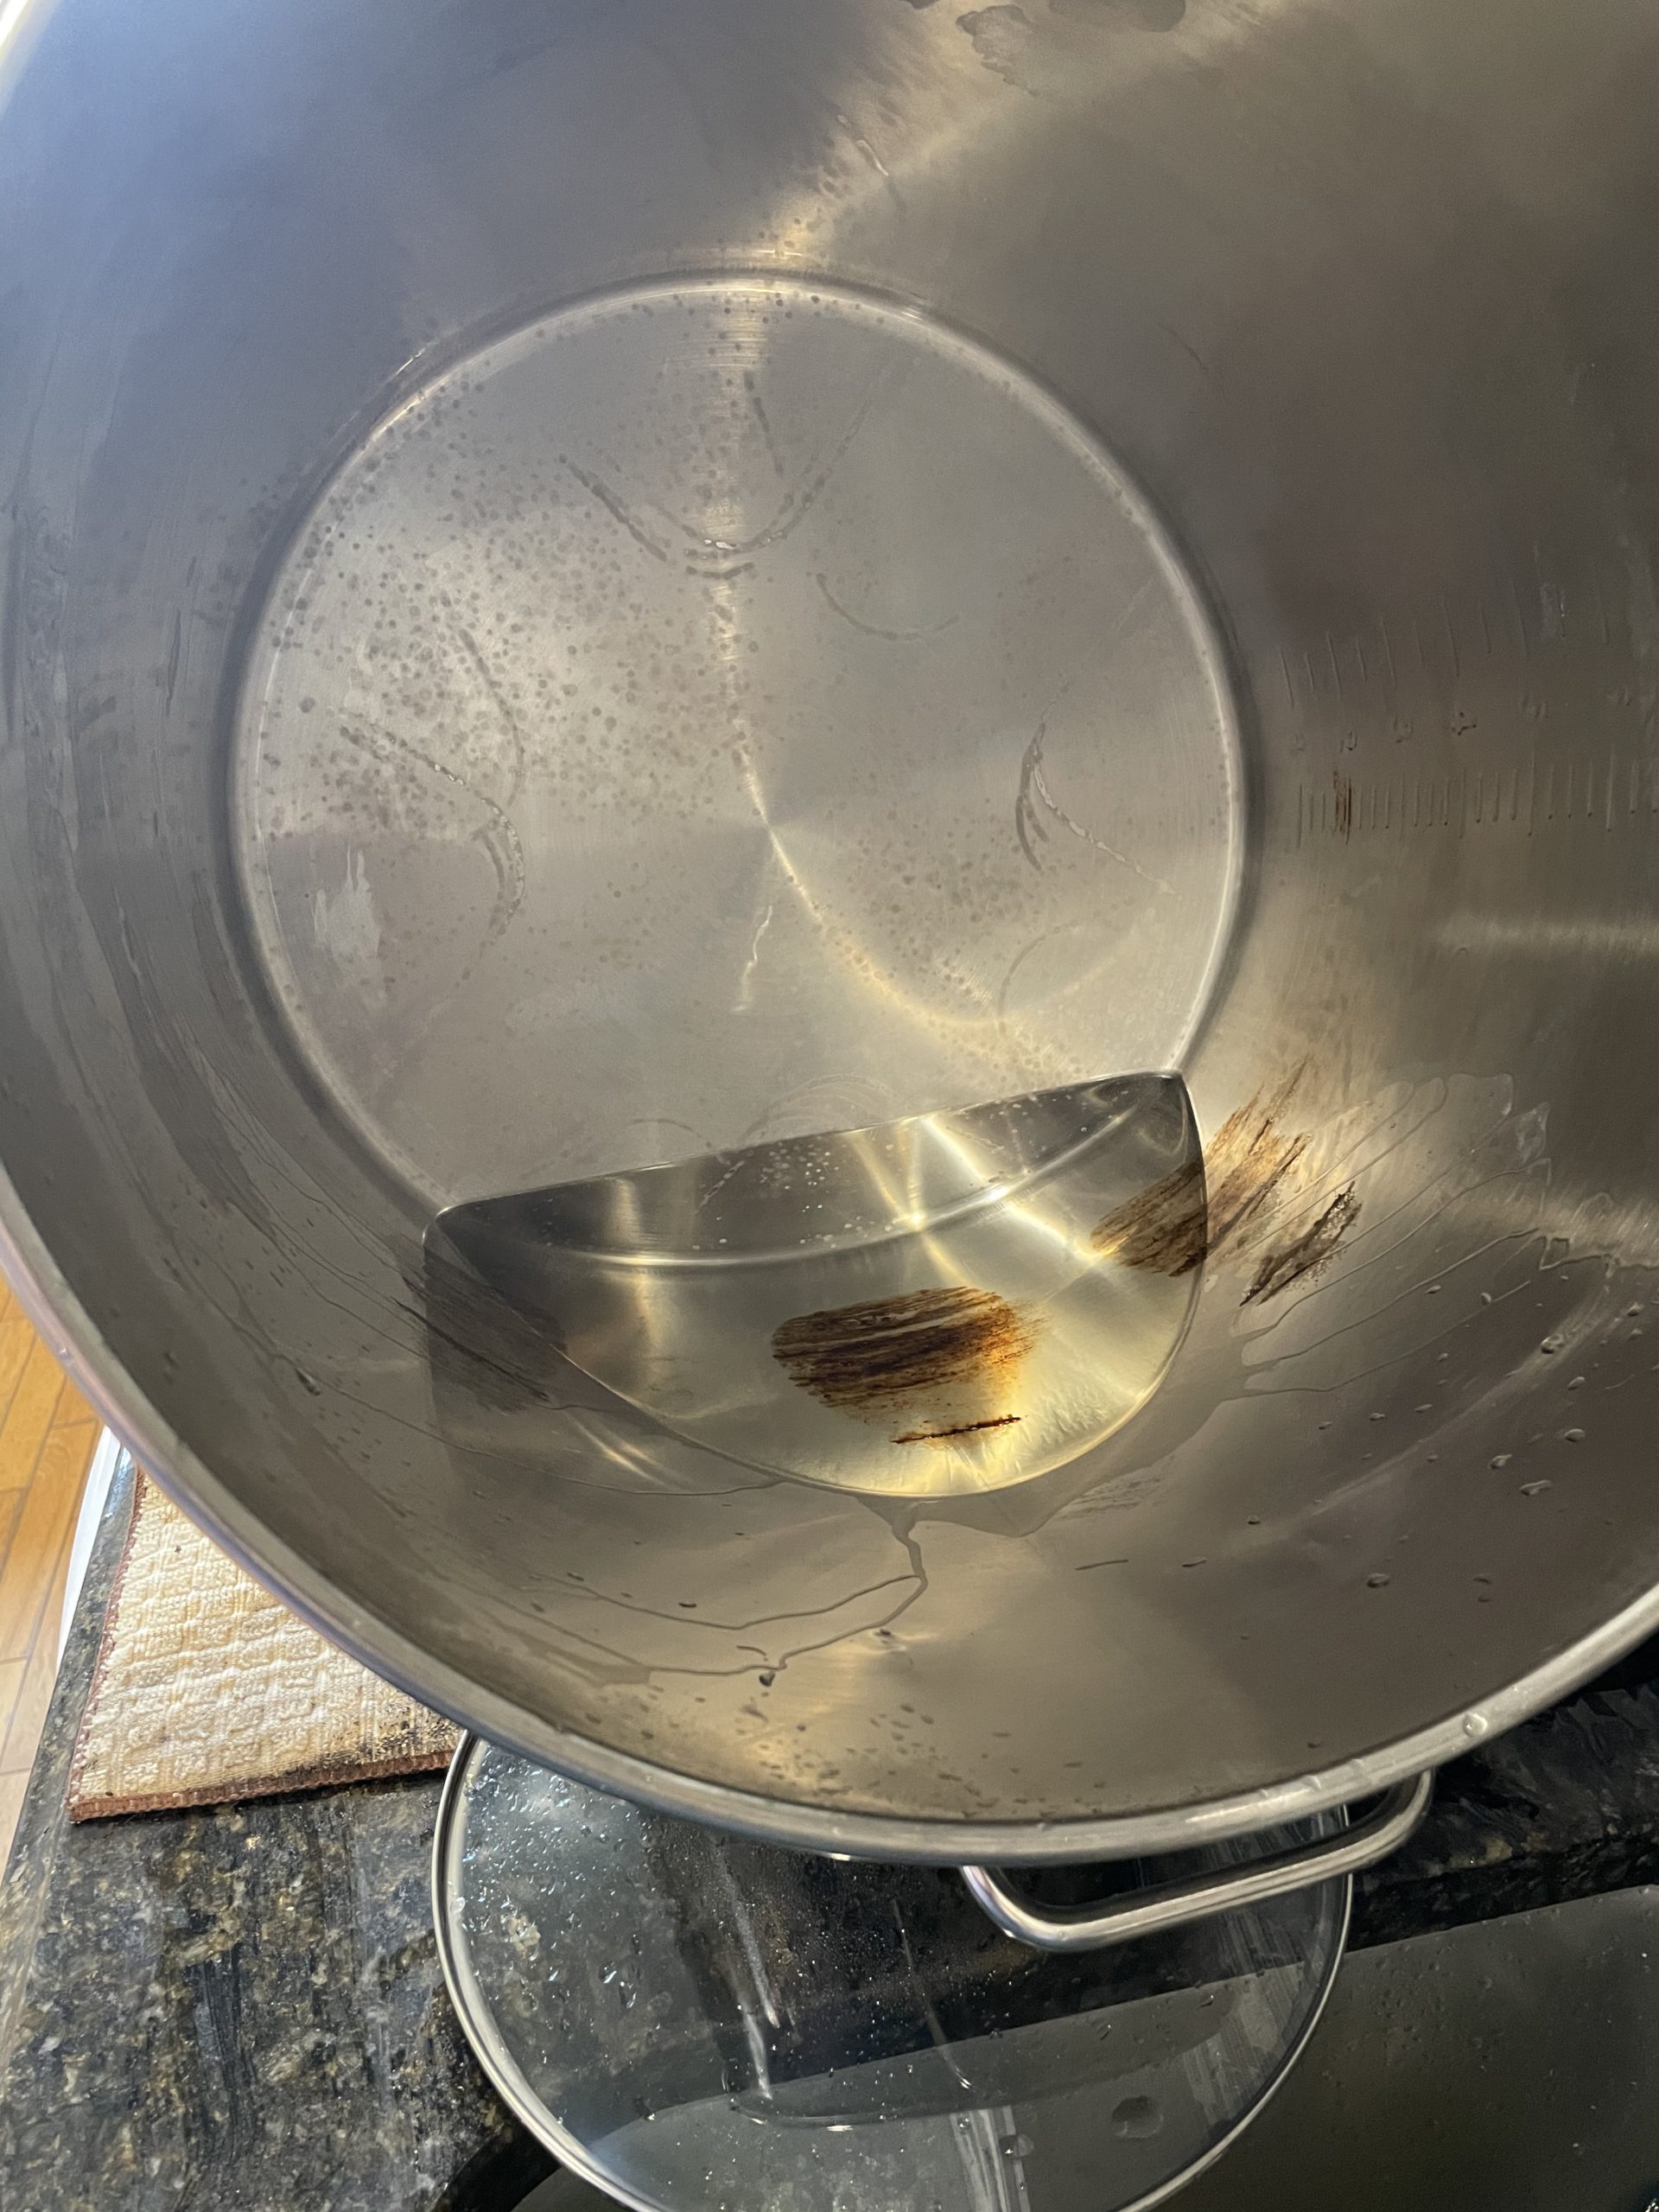 Washing Burnt Maple Syrup with Vinegar